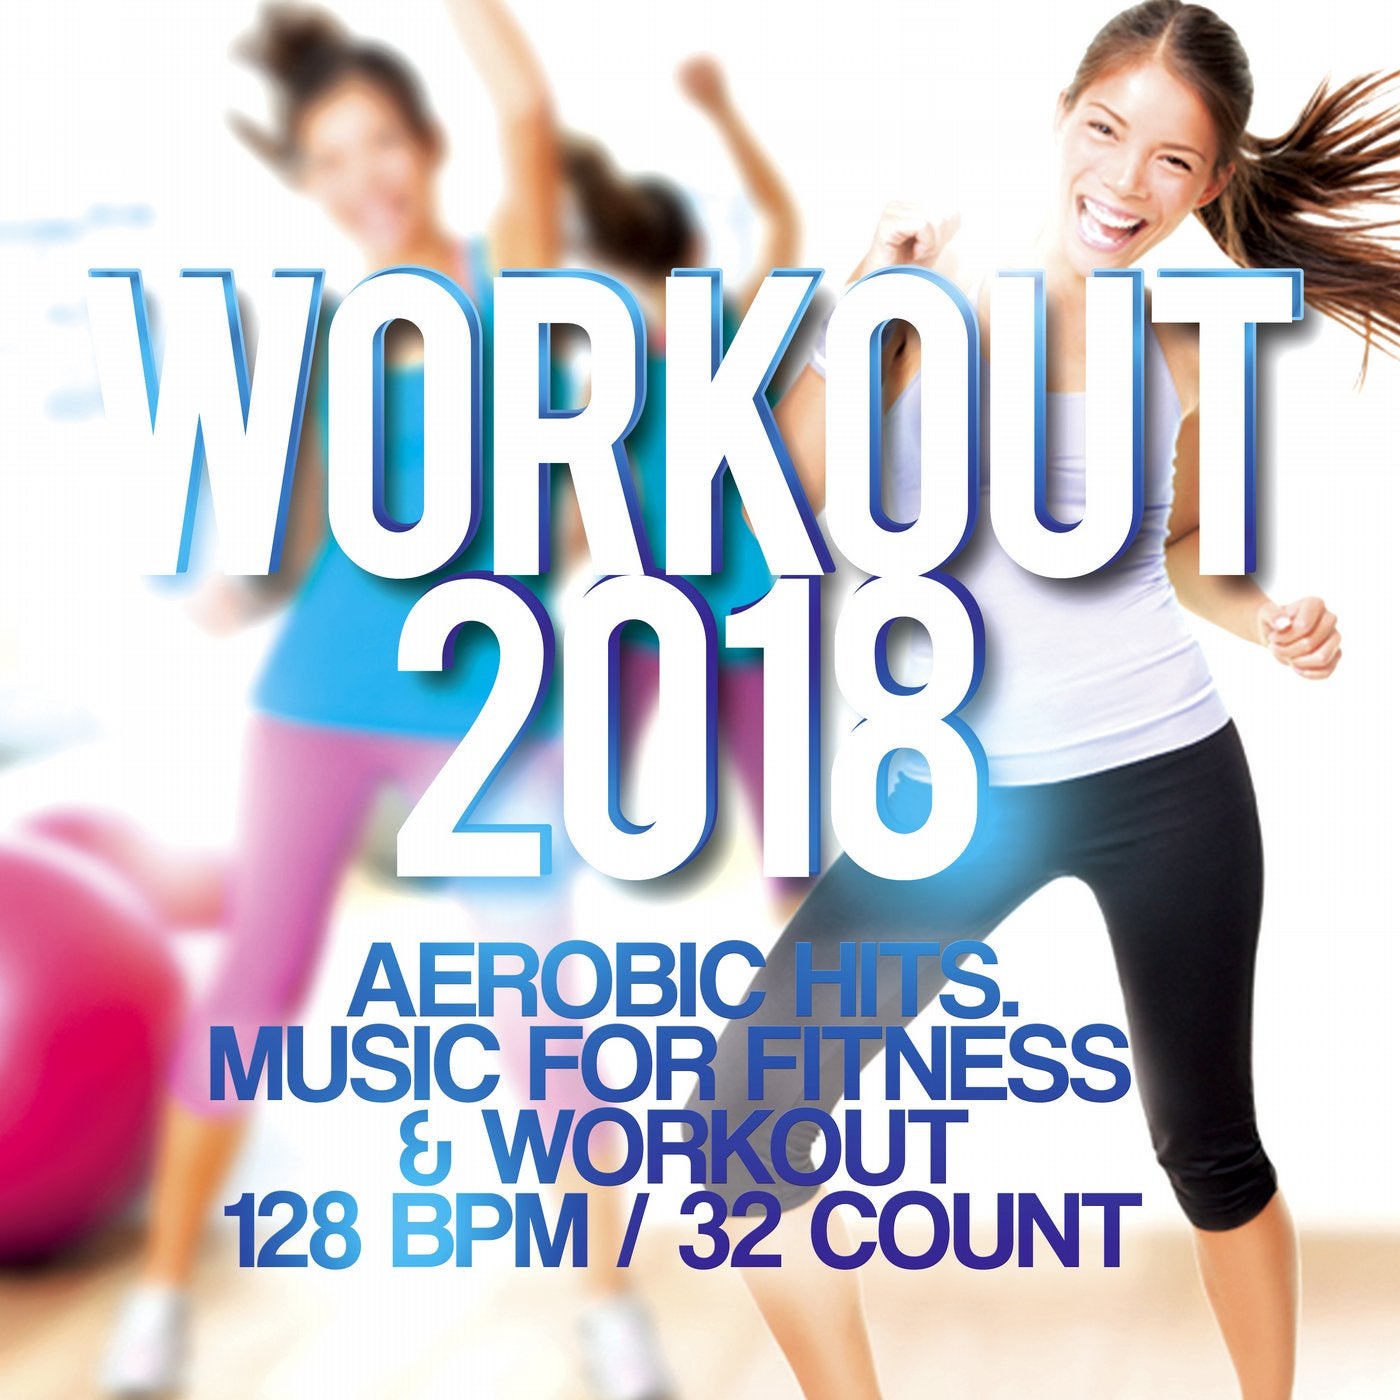 Workout 2018 - Aerobic Hits. Music For Fitness & Workout 128 Bpm / 32 Count